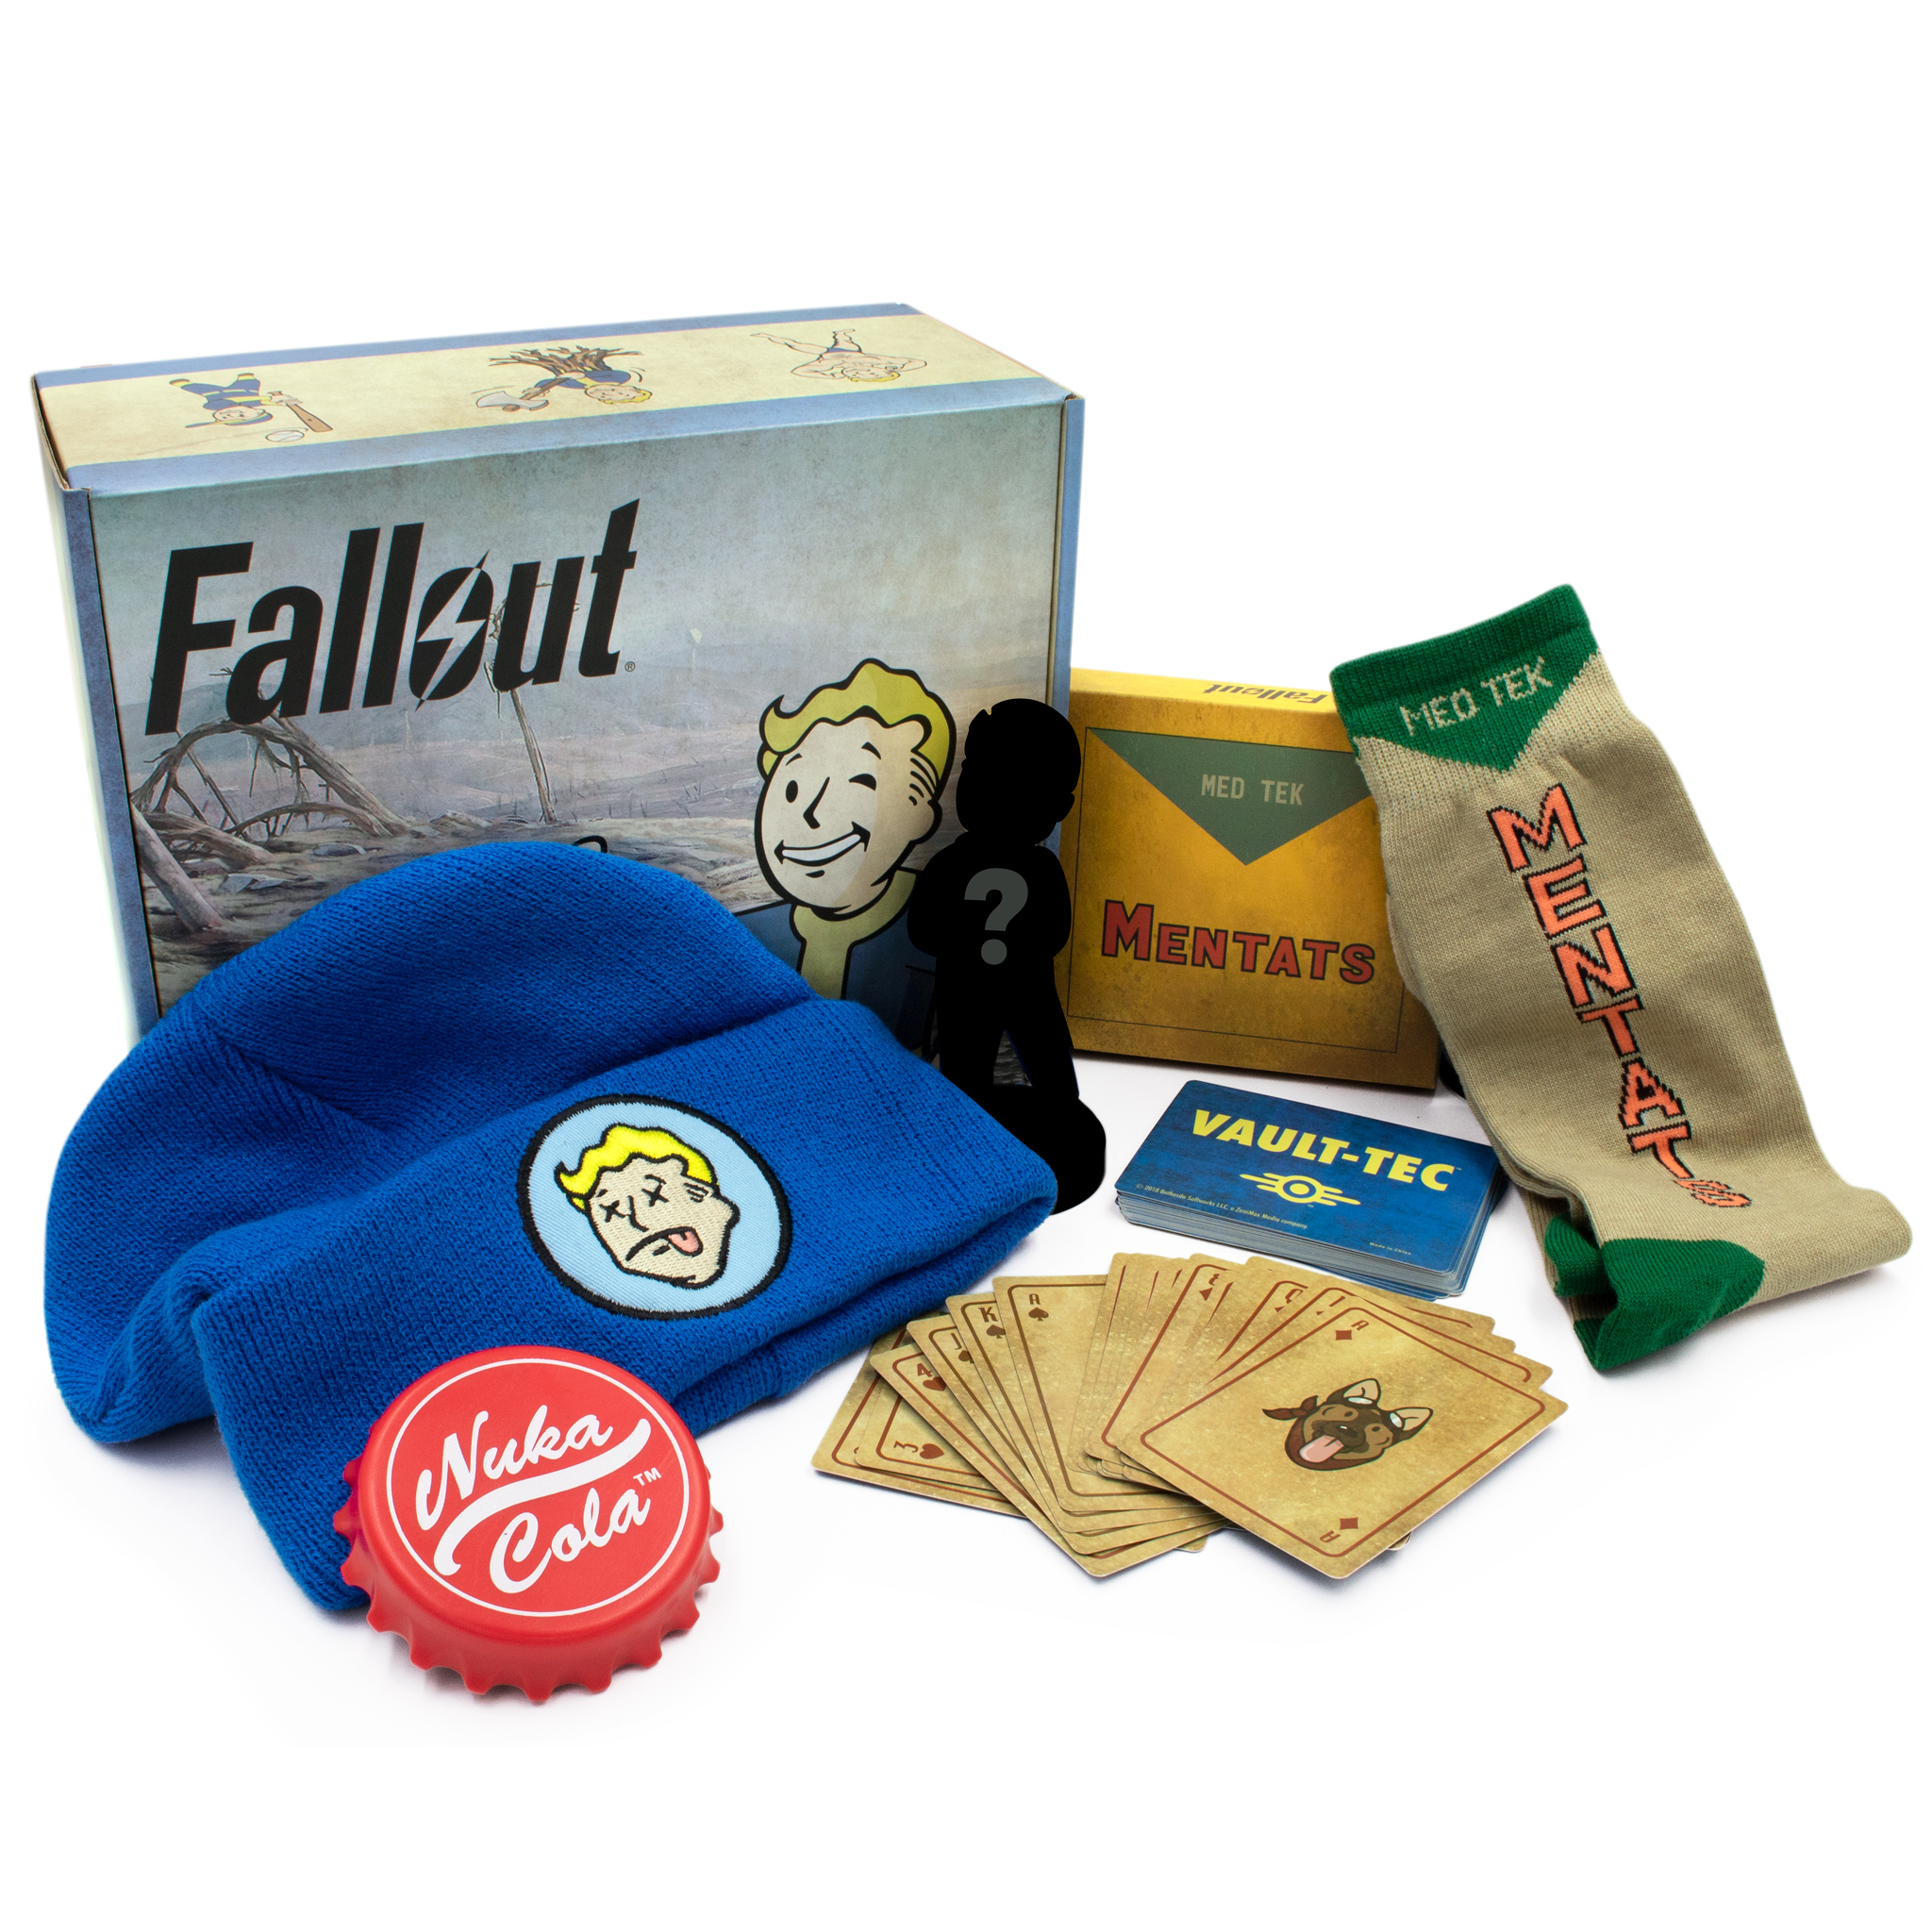 CultureFly Fallout Collectible Box - image 2 of 8